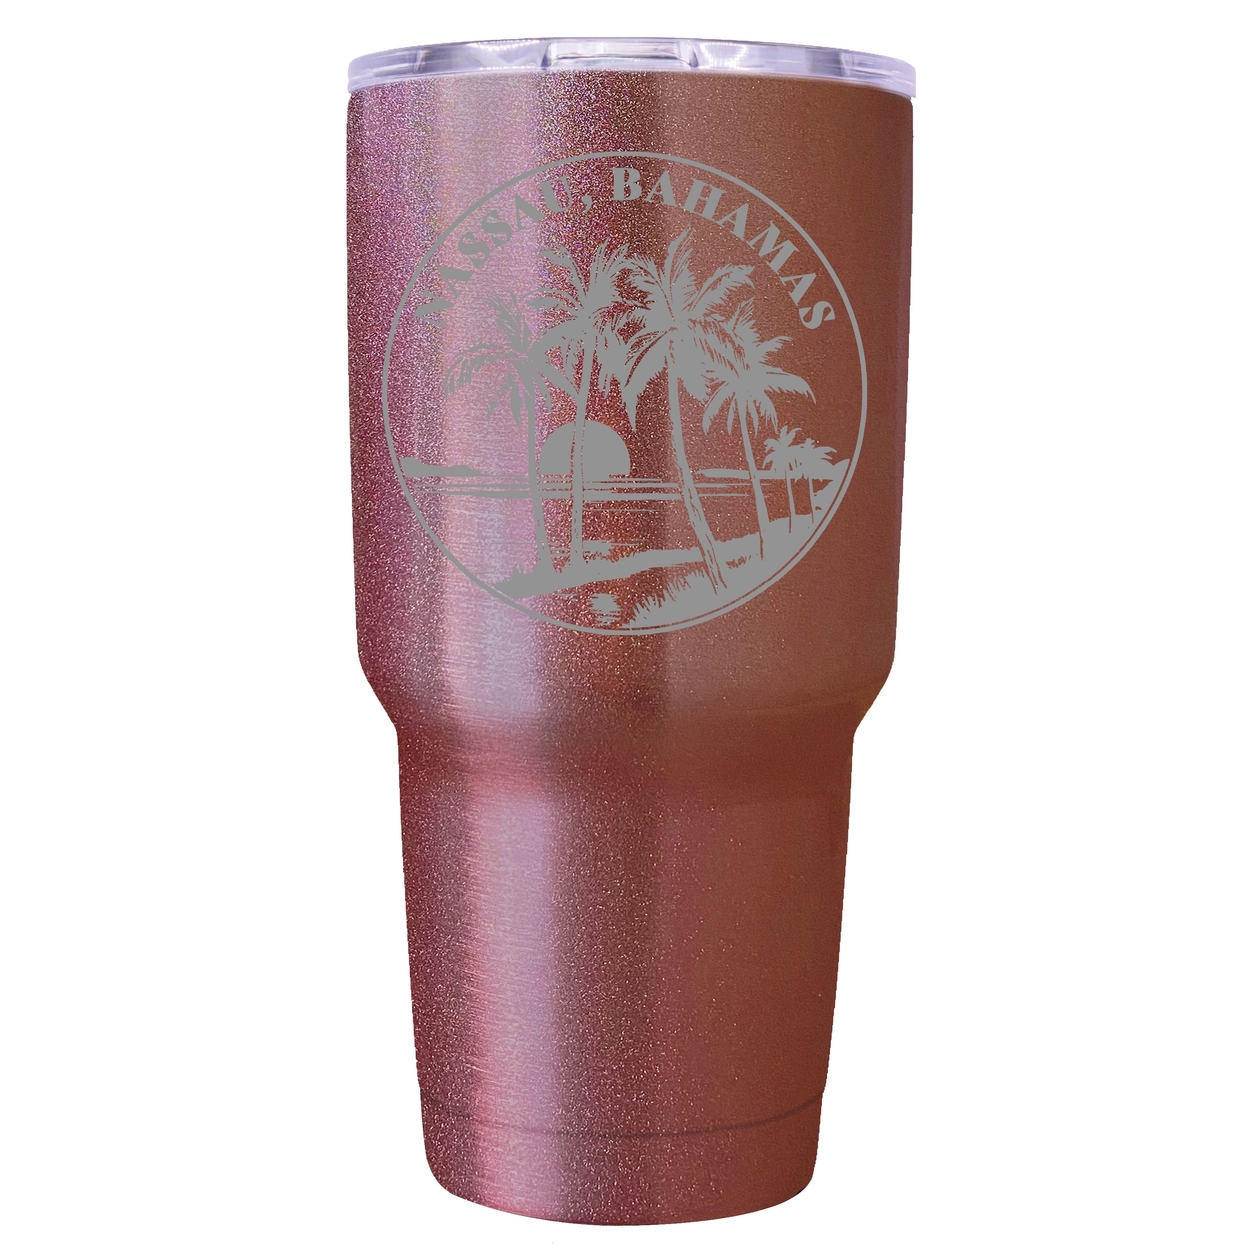 Nassau The Bahamas Souvenir 24 Oz Engraved Insulated Stainless Steel Tumbler - White,,2-Pack